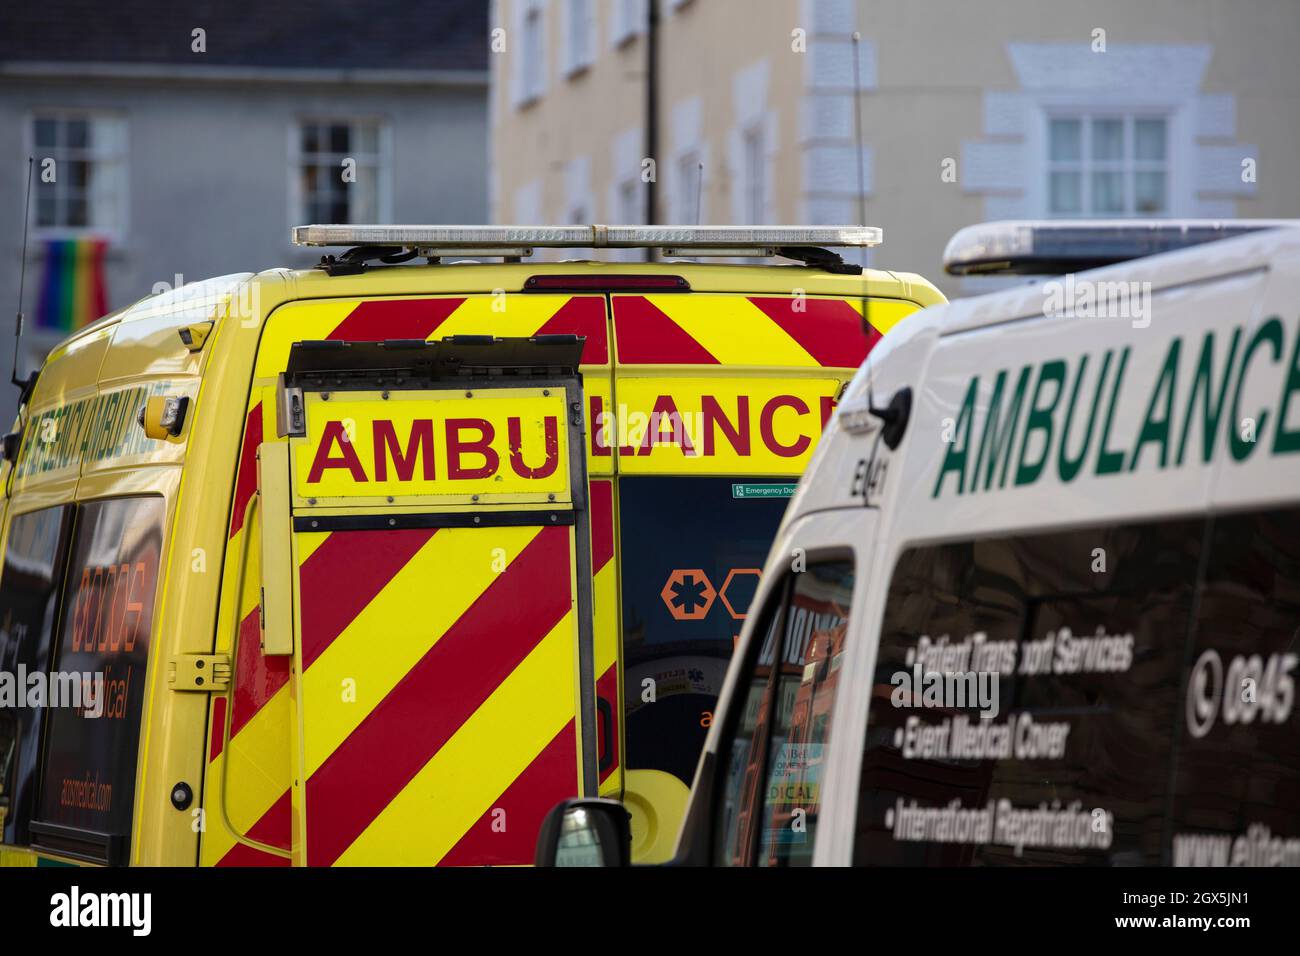 Bicester, UK - October 2021: Emergency response ambulances attend an urgent accident Stock Photo